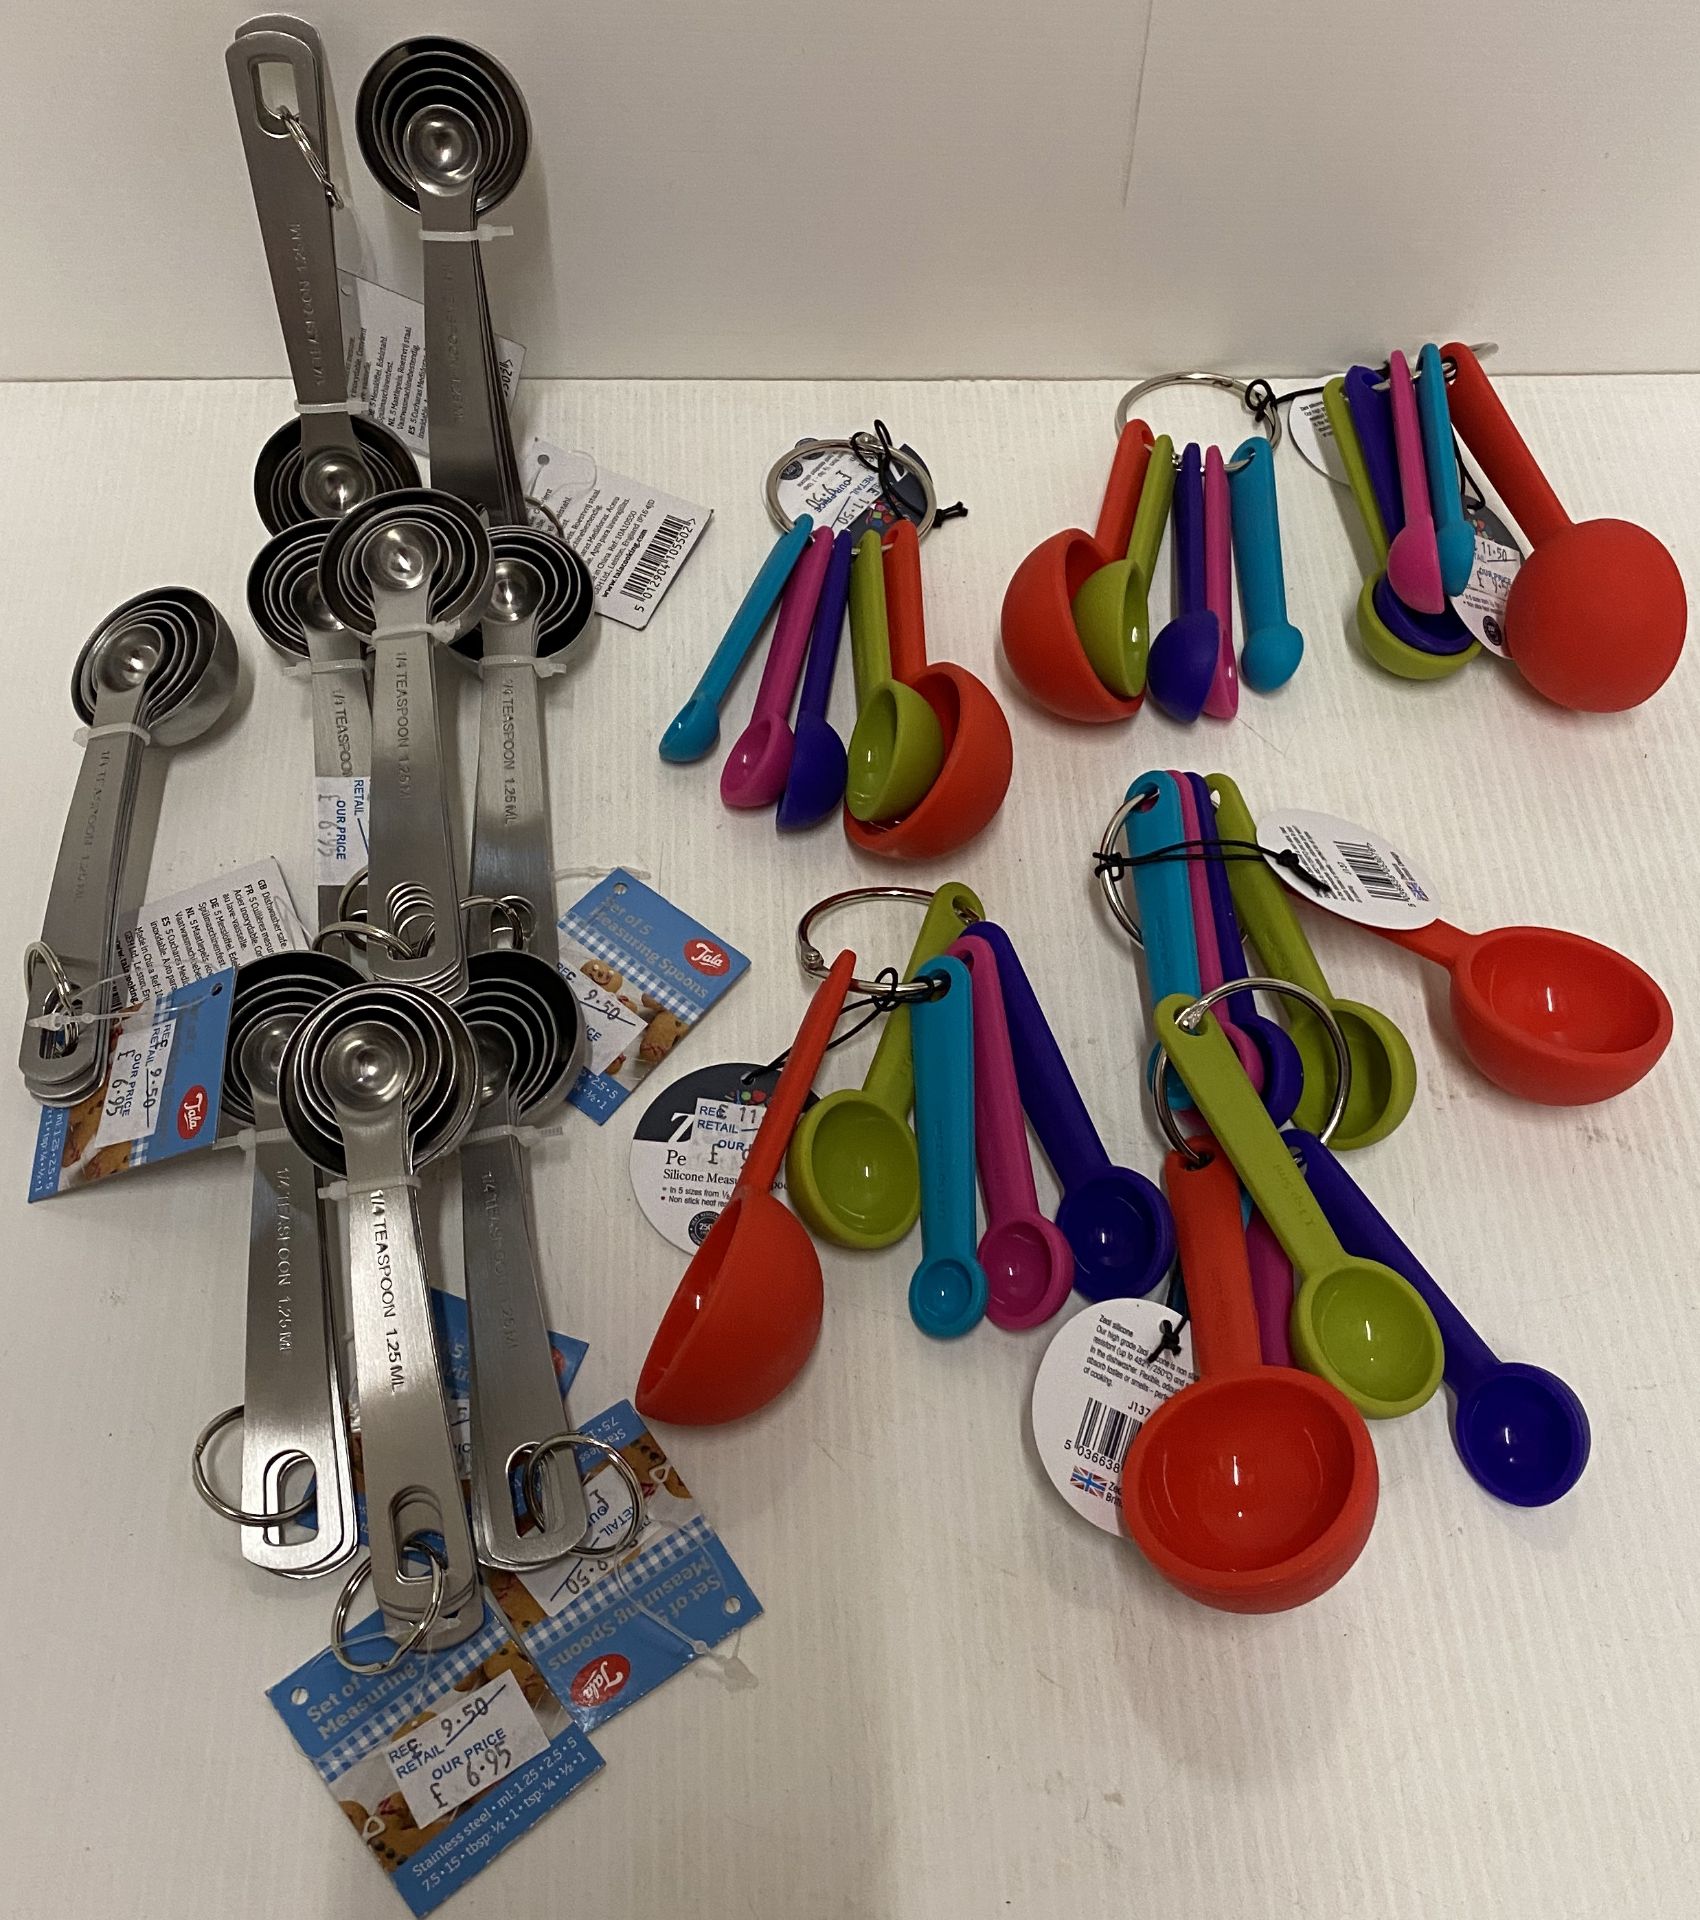 16 x assorted measuring spoon sets by Ze